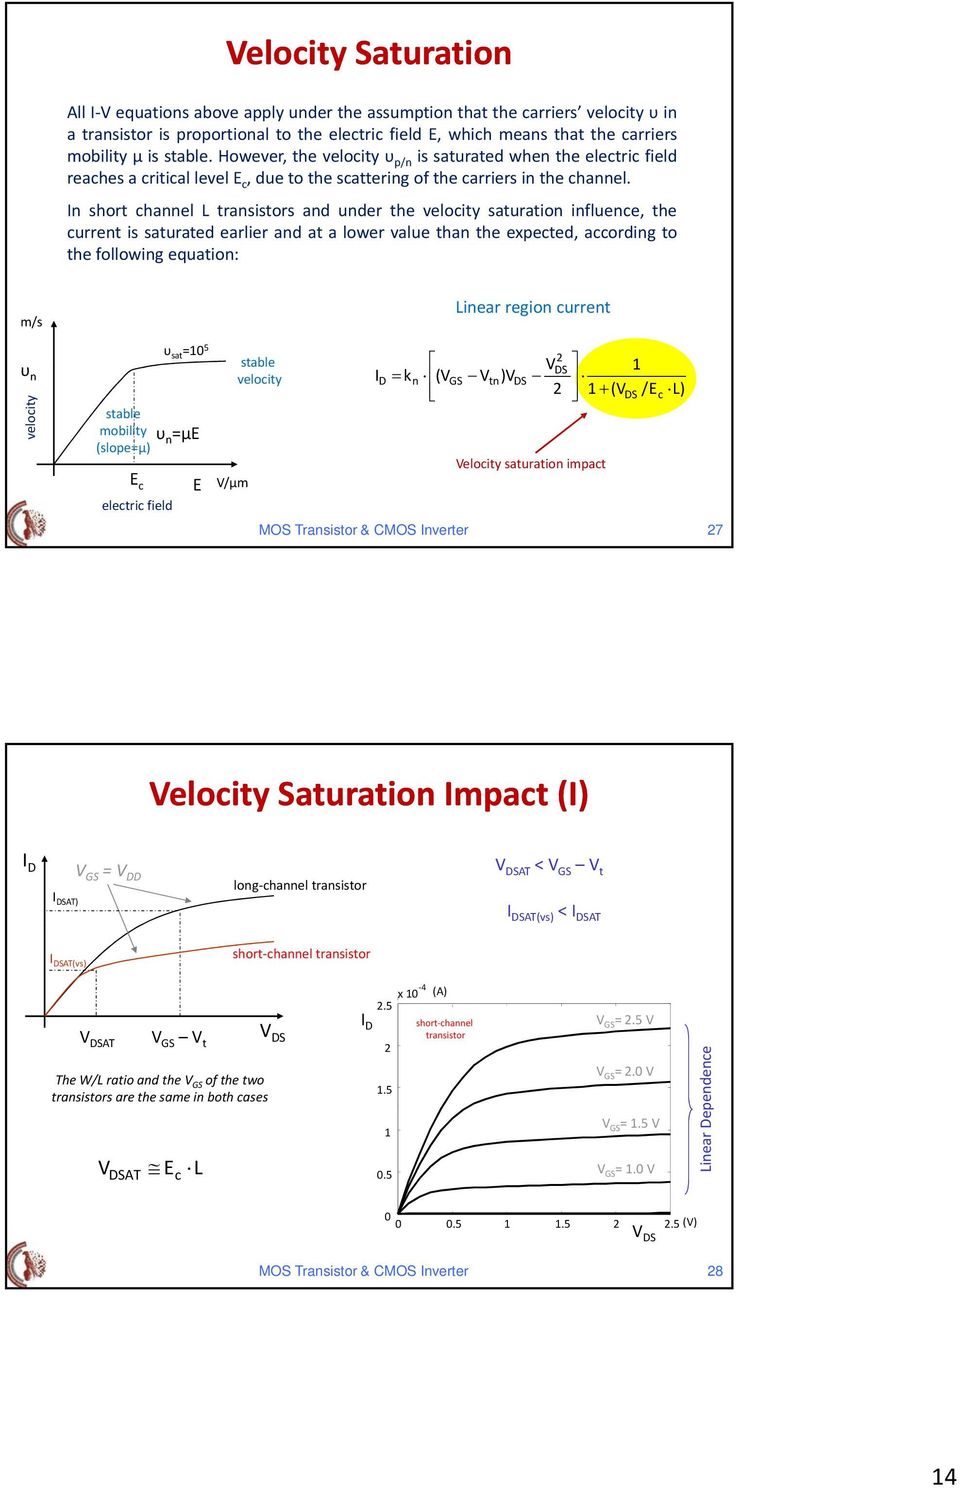 I short chael L trasistors ad uder the velocity saturatio ifluece, the curret is saturated earlier ad at a lower value tha the expected, accordig to the followig equatio: m/s υ velocity stable